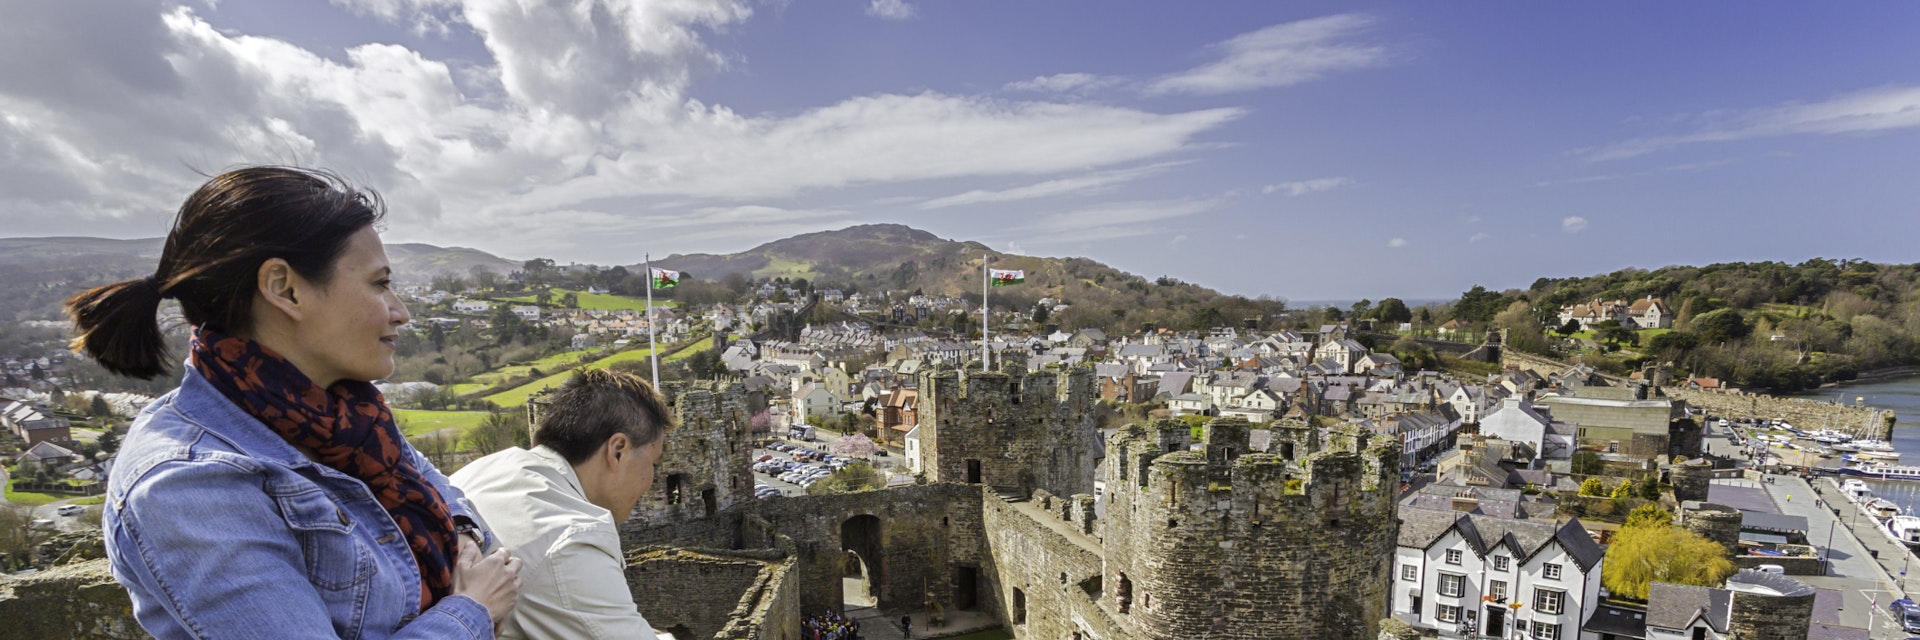 Couple visiting the castle.Conwy Castle.Cadw Sites.World Heritage Sites.SAMN: CN004.NGR: SH783774.Conwy.North.Castles.Medieval.Defence.Historic Sites